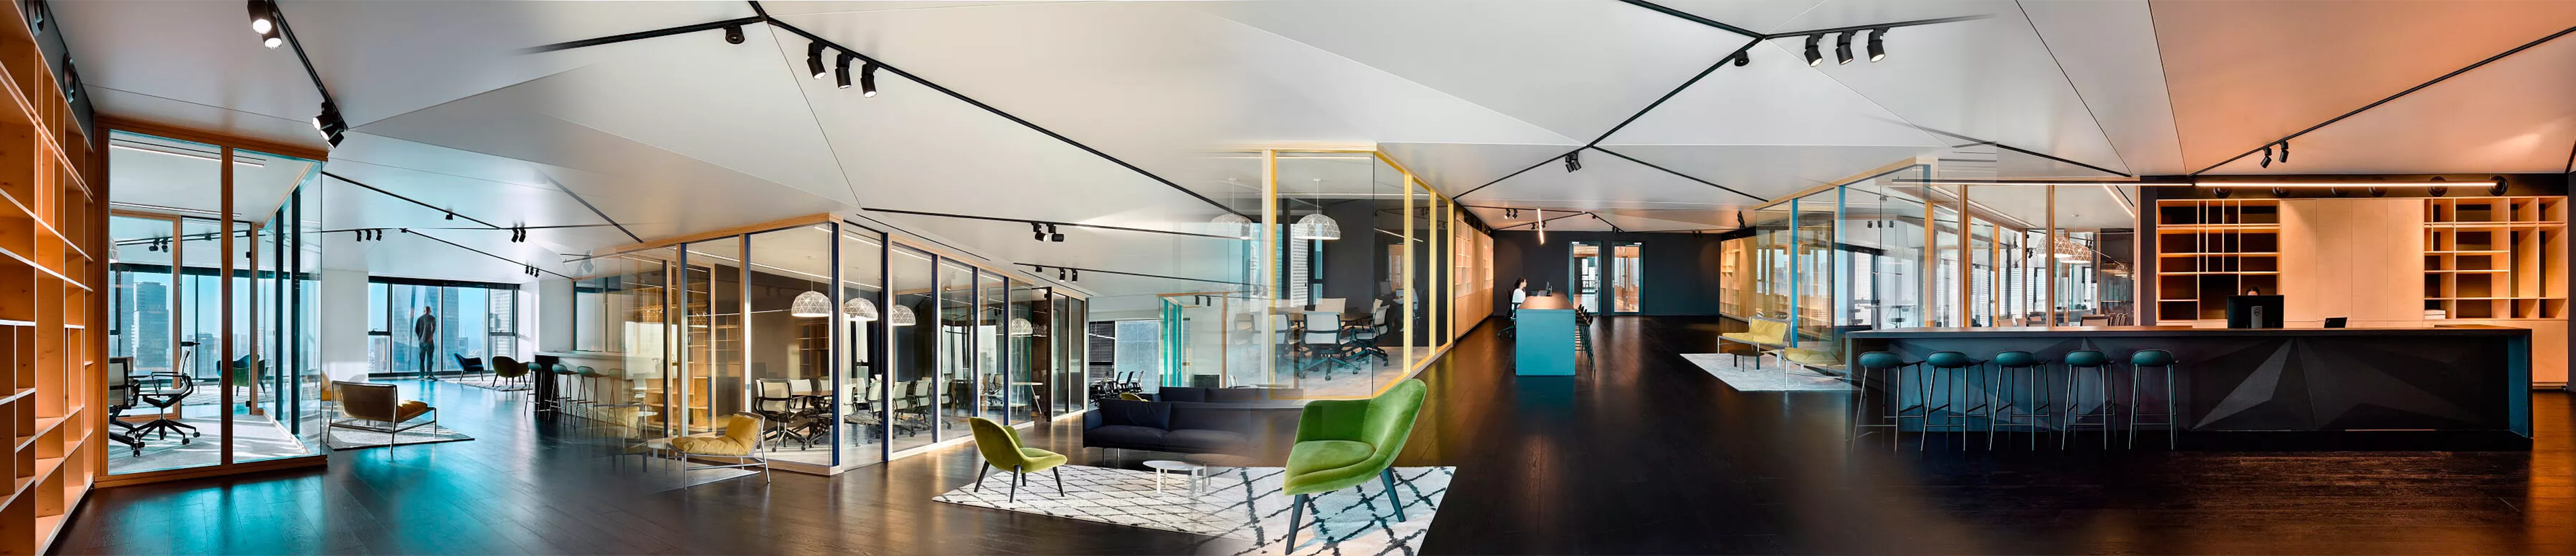 Office in Israel by Ostral Stretched Ceilings